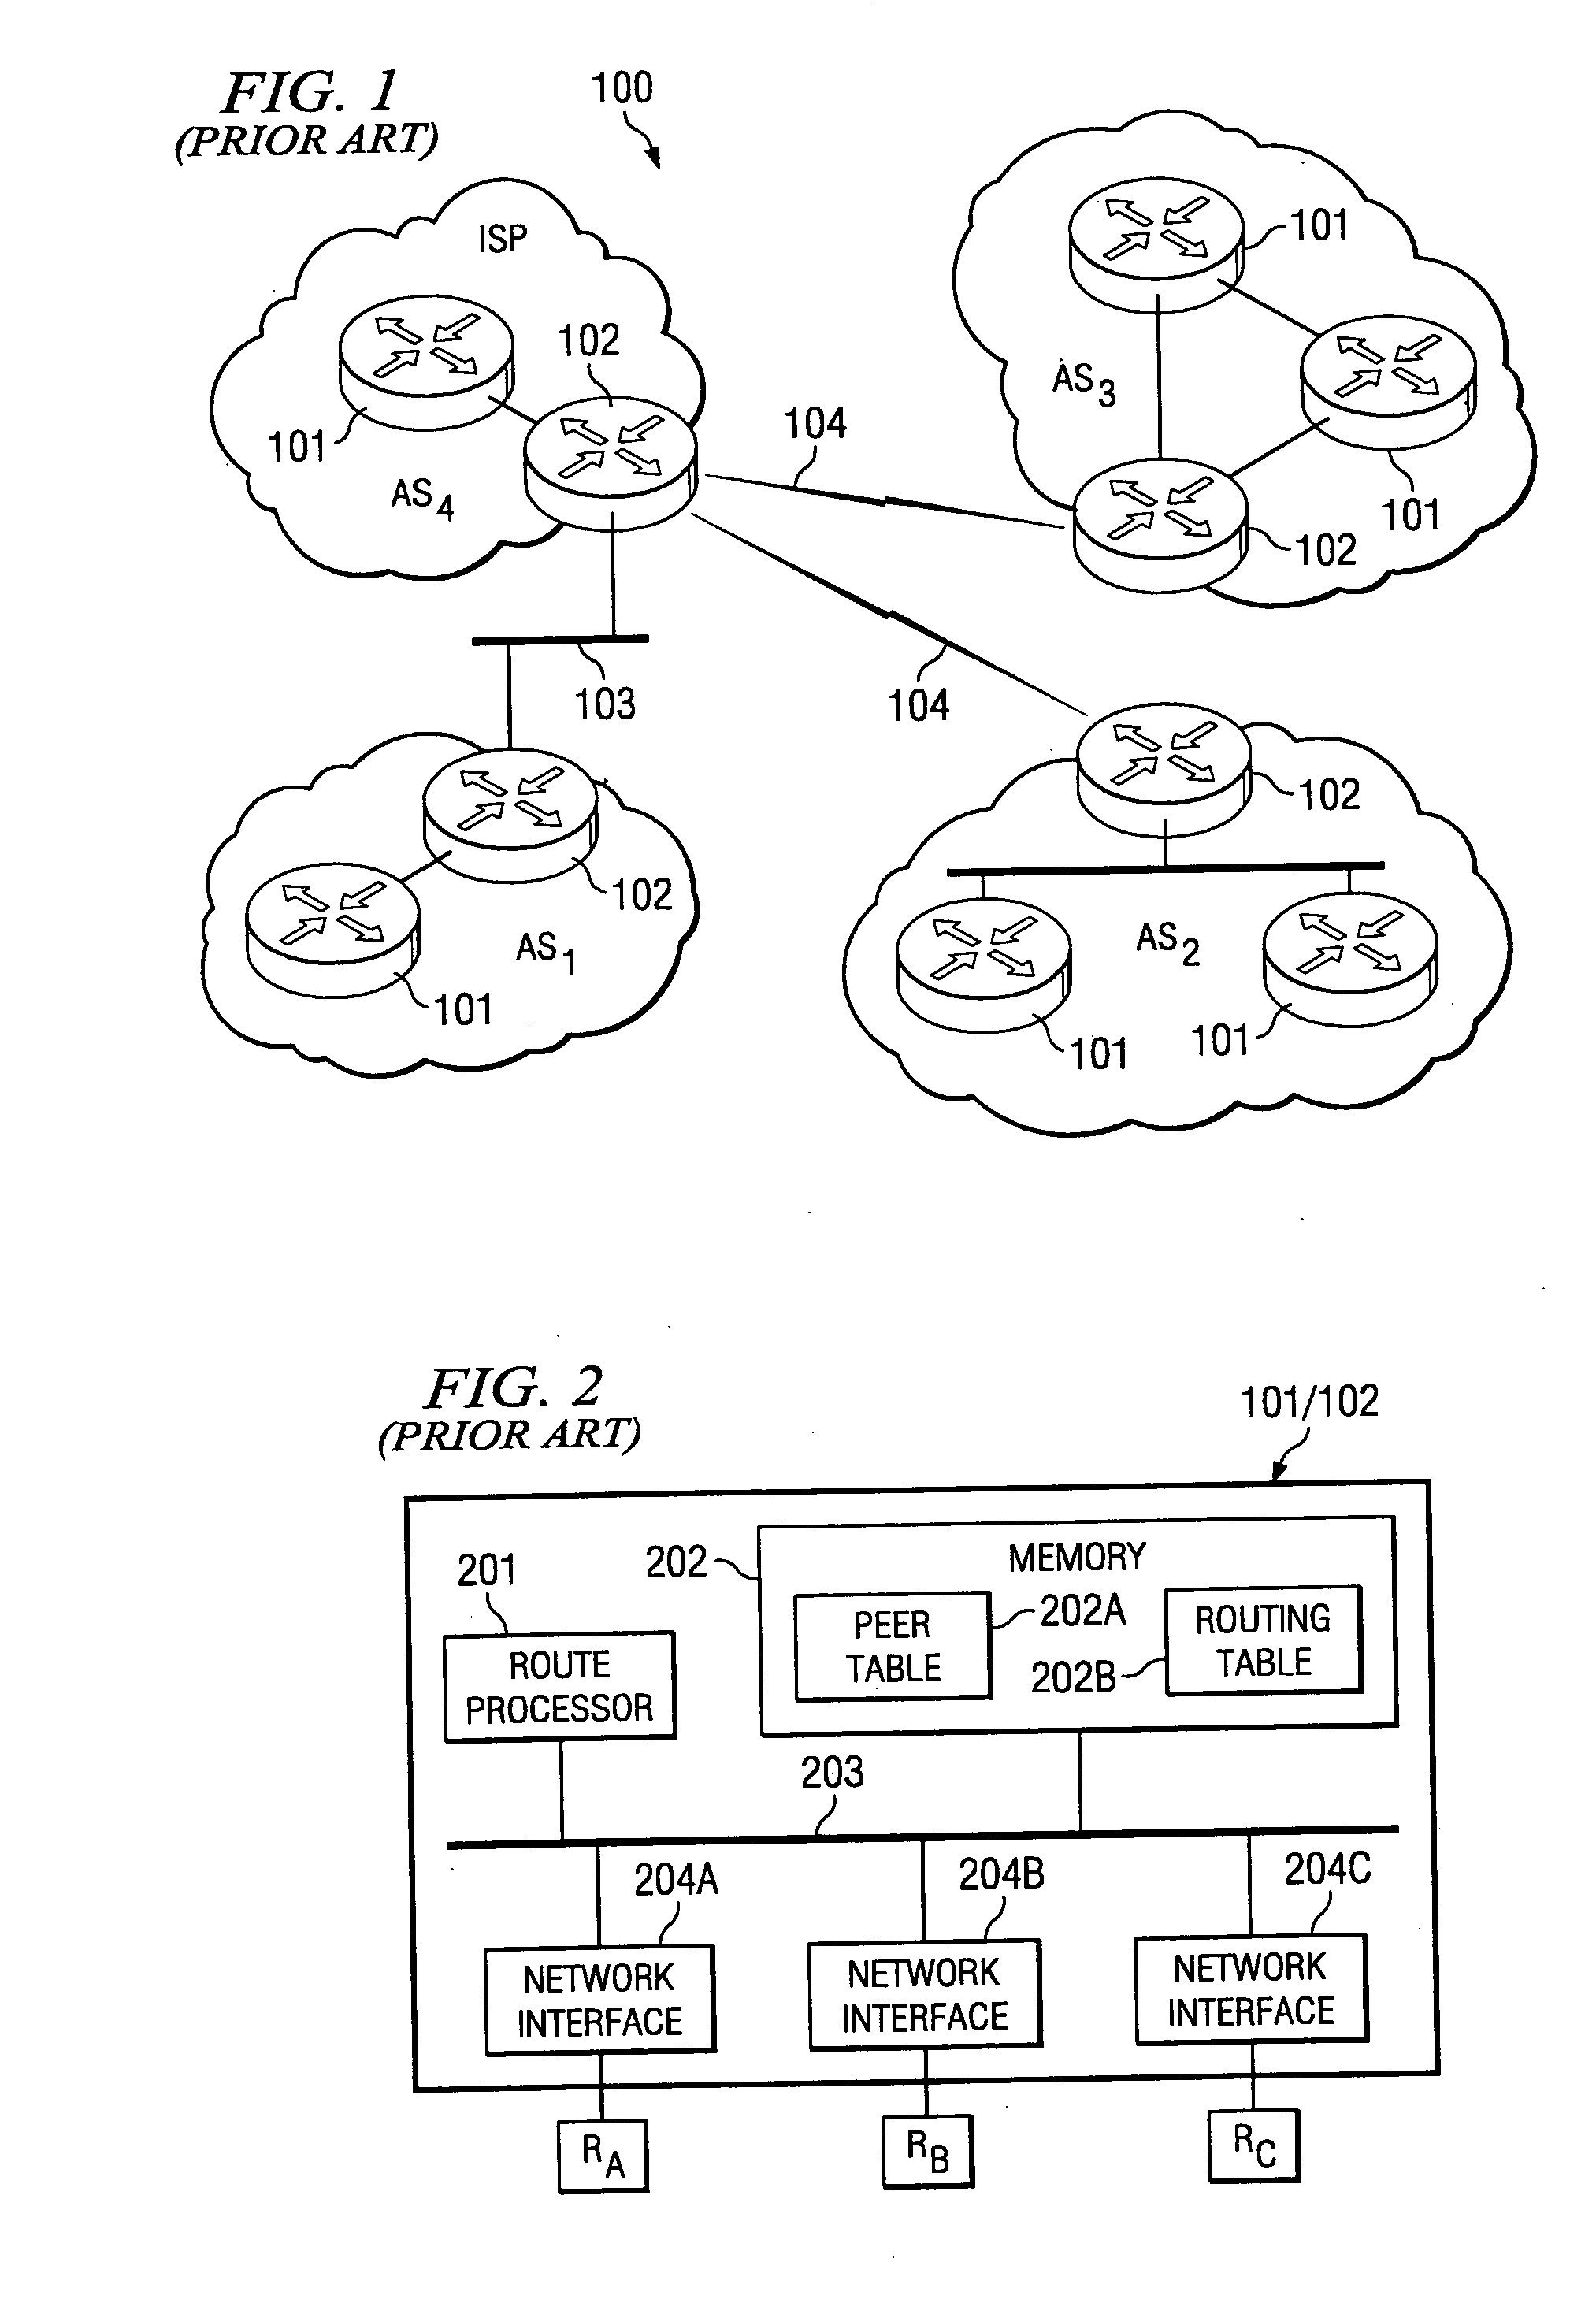 System and method for discovery of BGP router topology